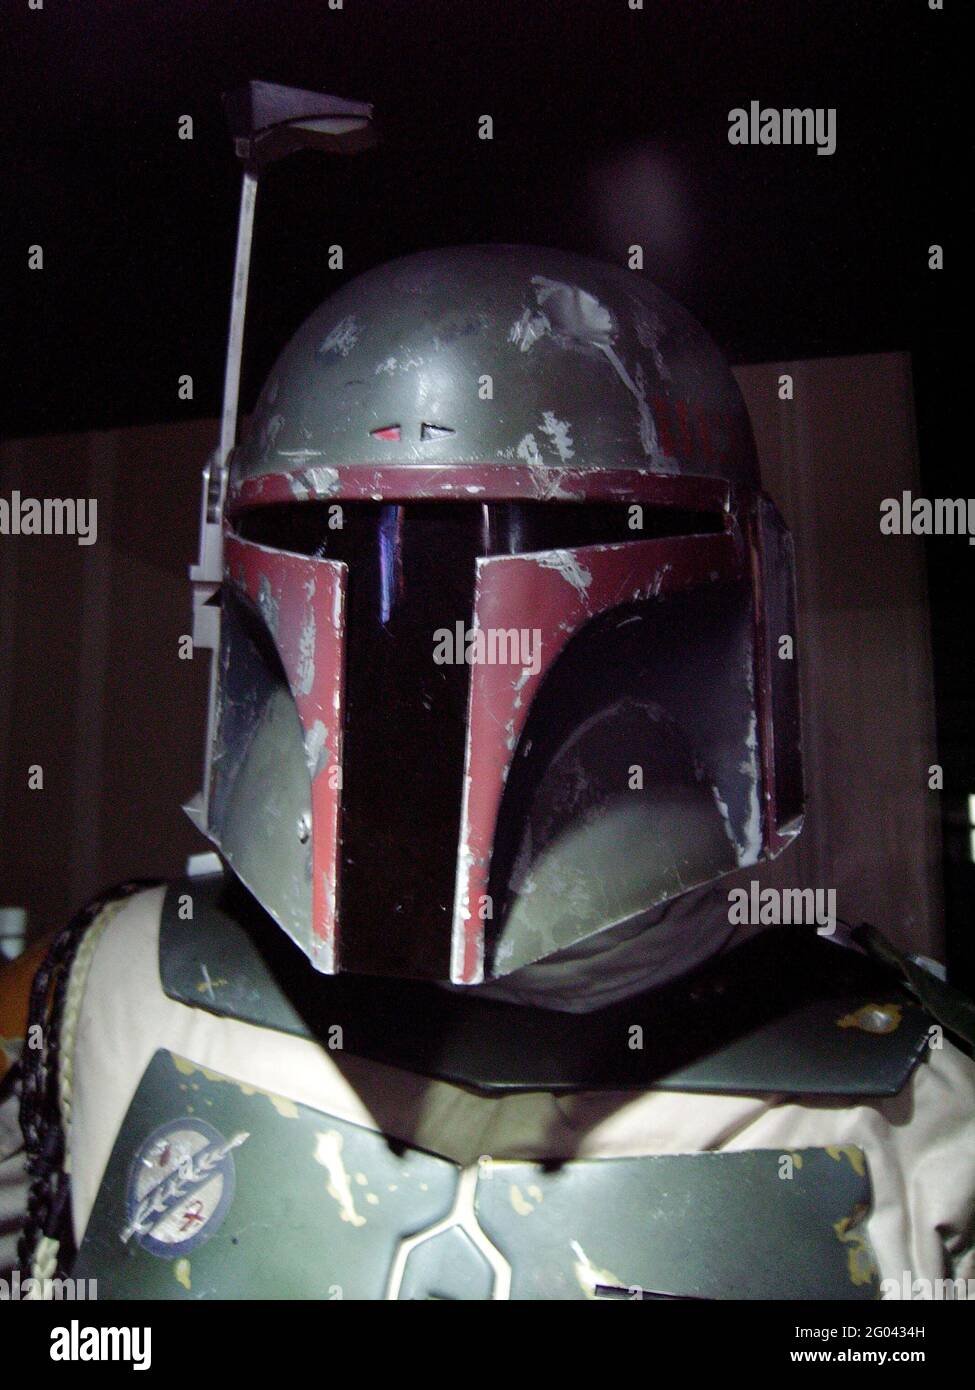 Original Star Wars Boba Fett costume when George Lucas brought the props  over to London Stock Photo - Alamy